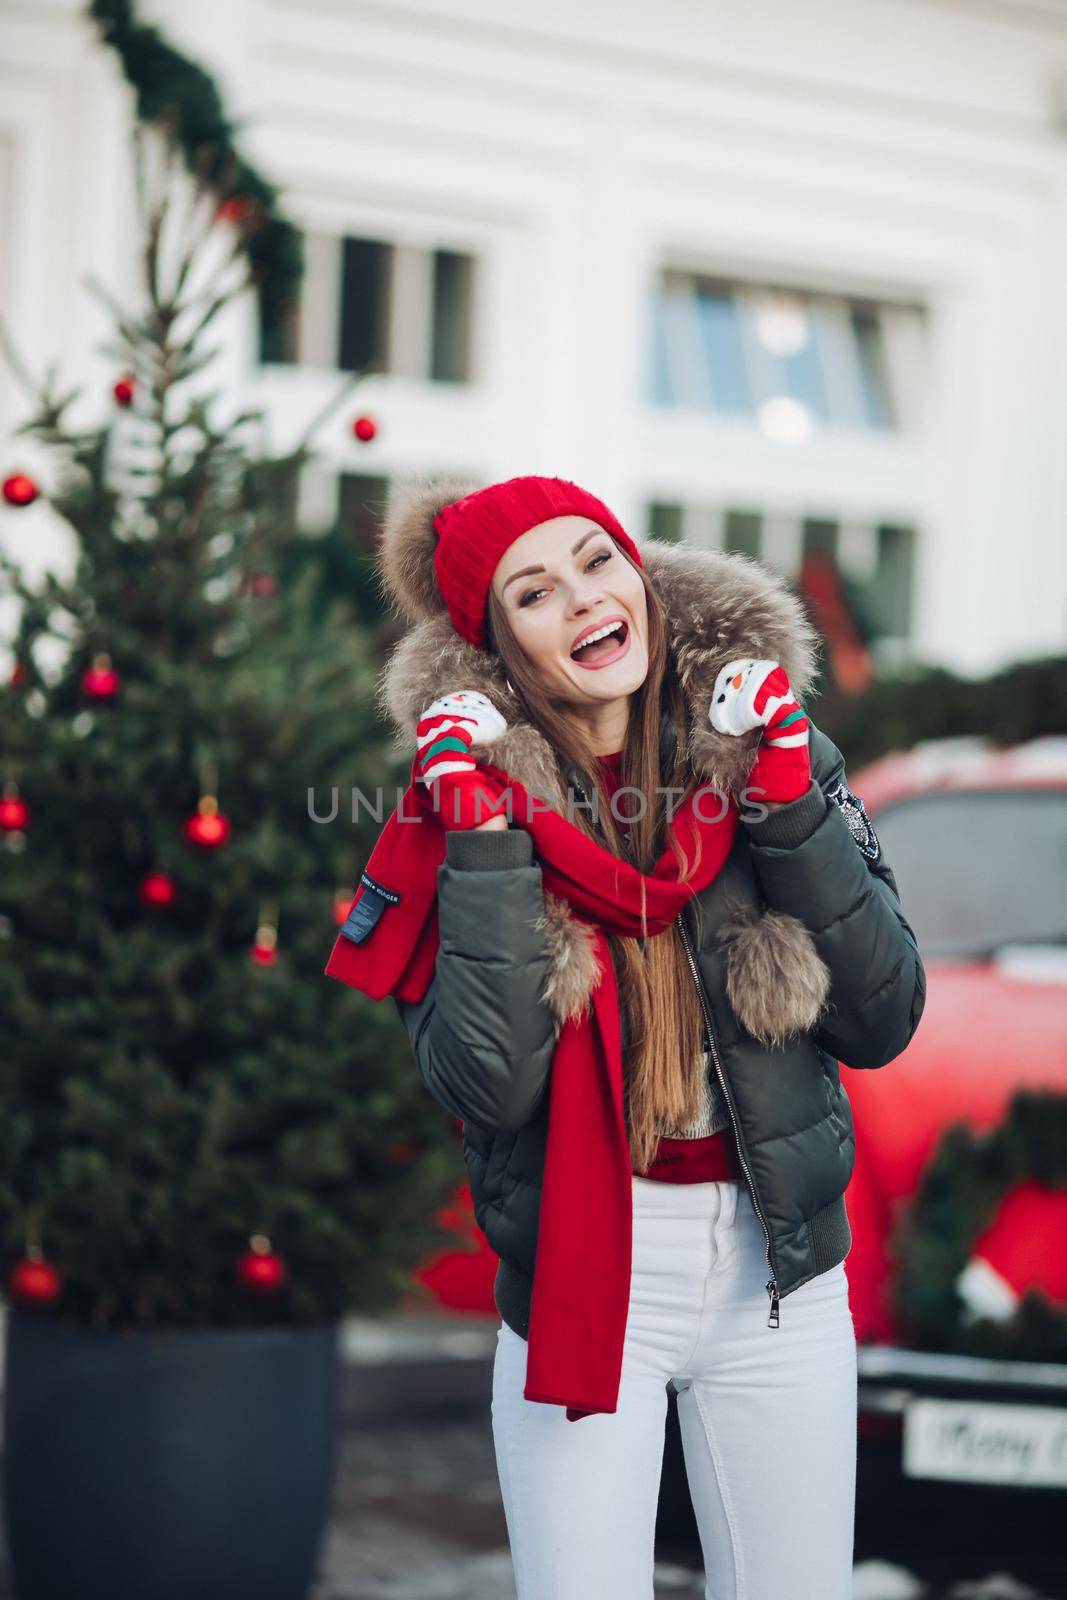 Belarus Minsk 16 12 2019:Beautiful winter young casual woman posing outdoor surrounded by snowflakes by StudioLucky